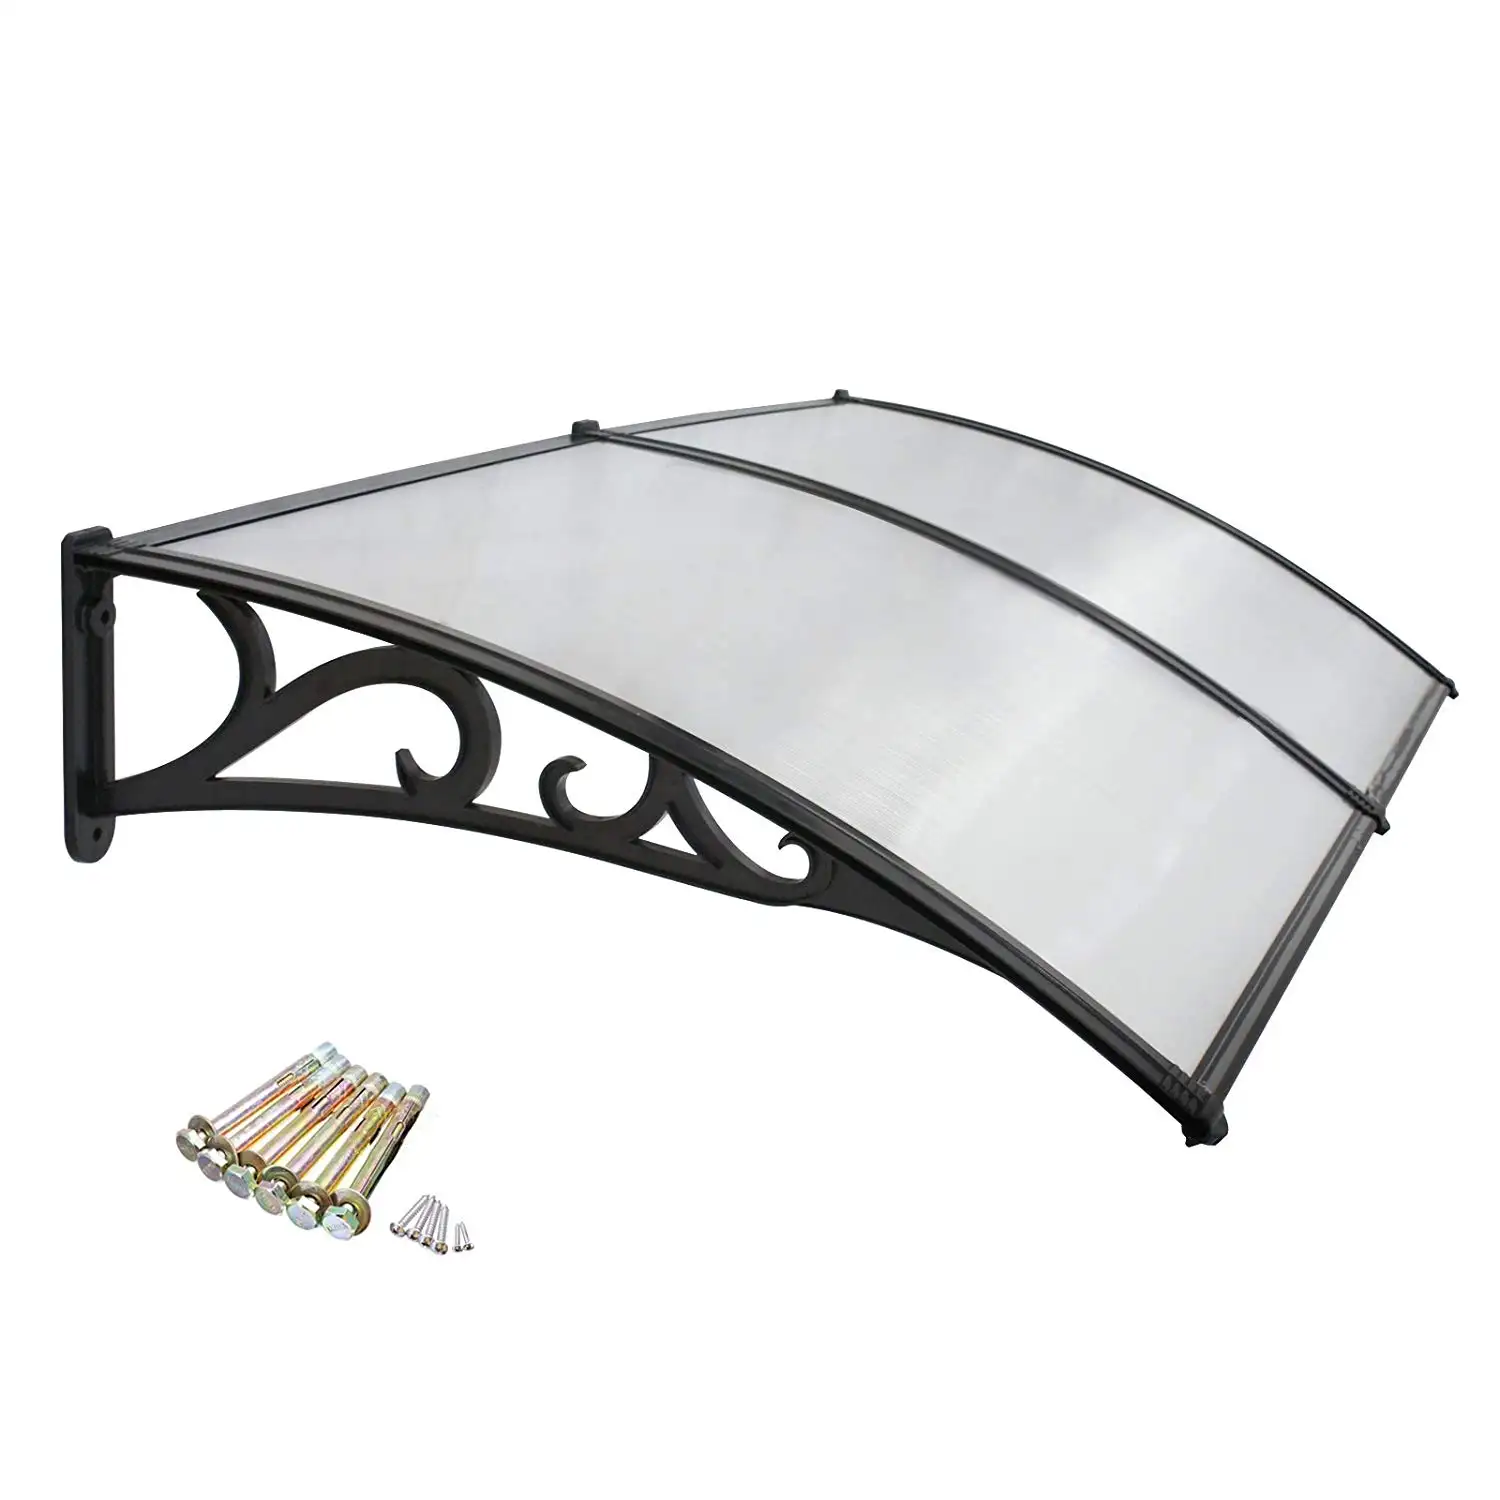 Polycarbonate Plastic door entrance awning